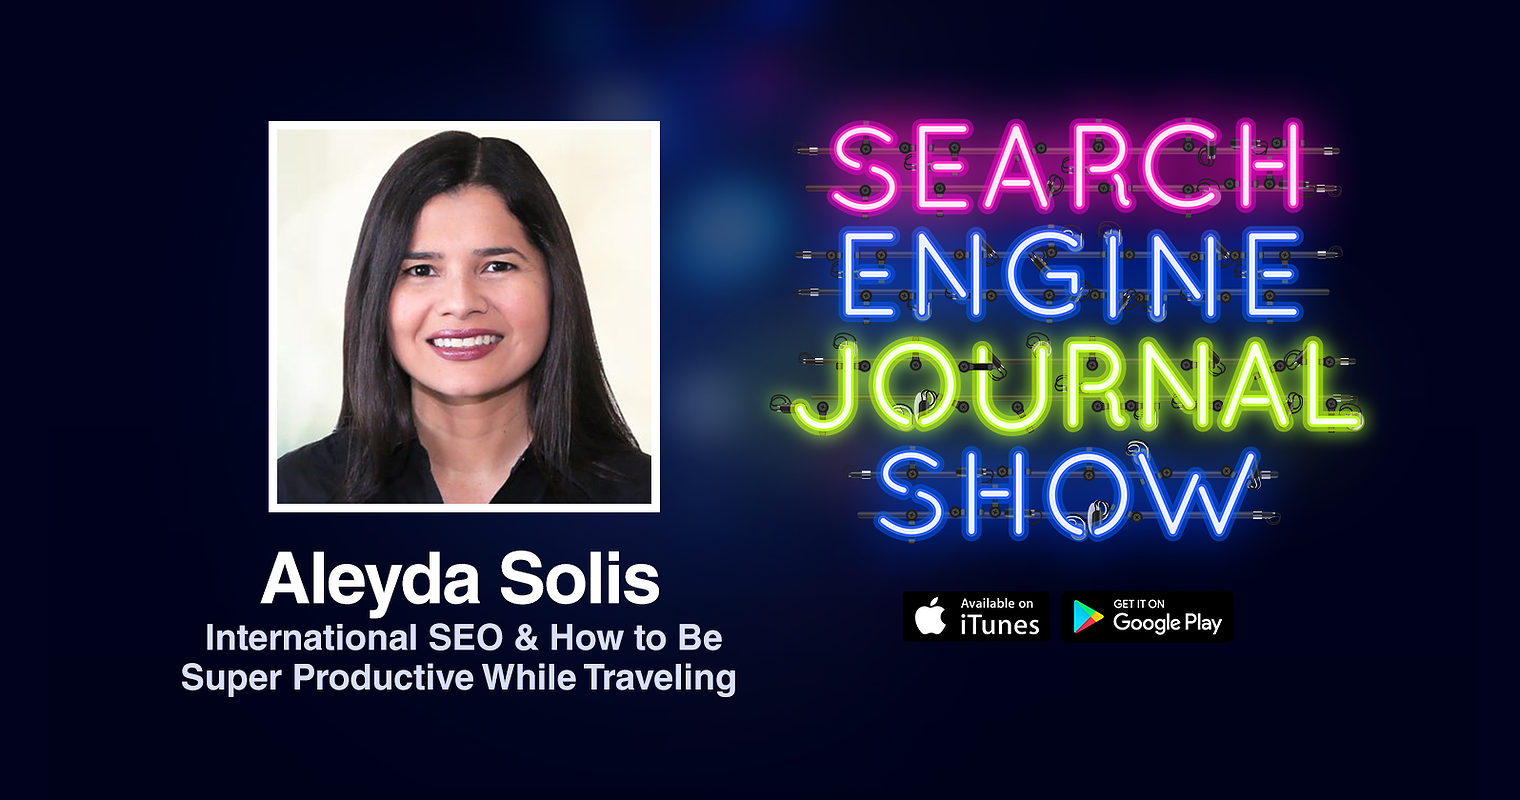 Aleyda Solis on International SEO & How to Be Super Productive While Traveling [PODCAST]